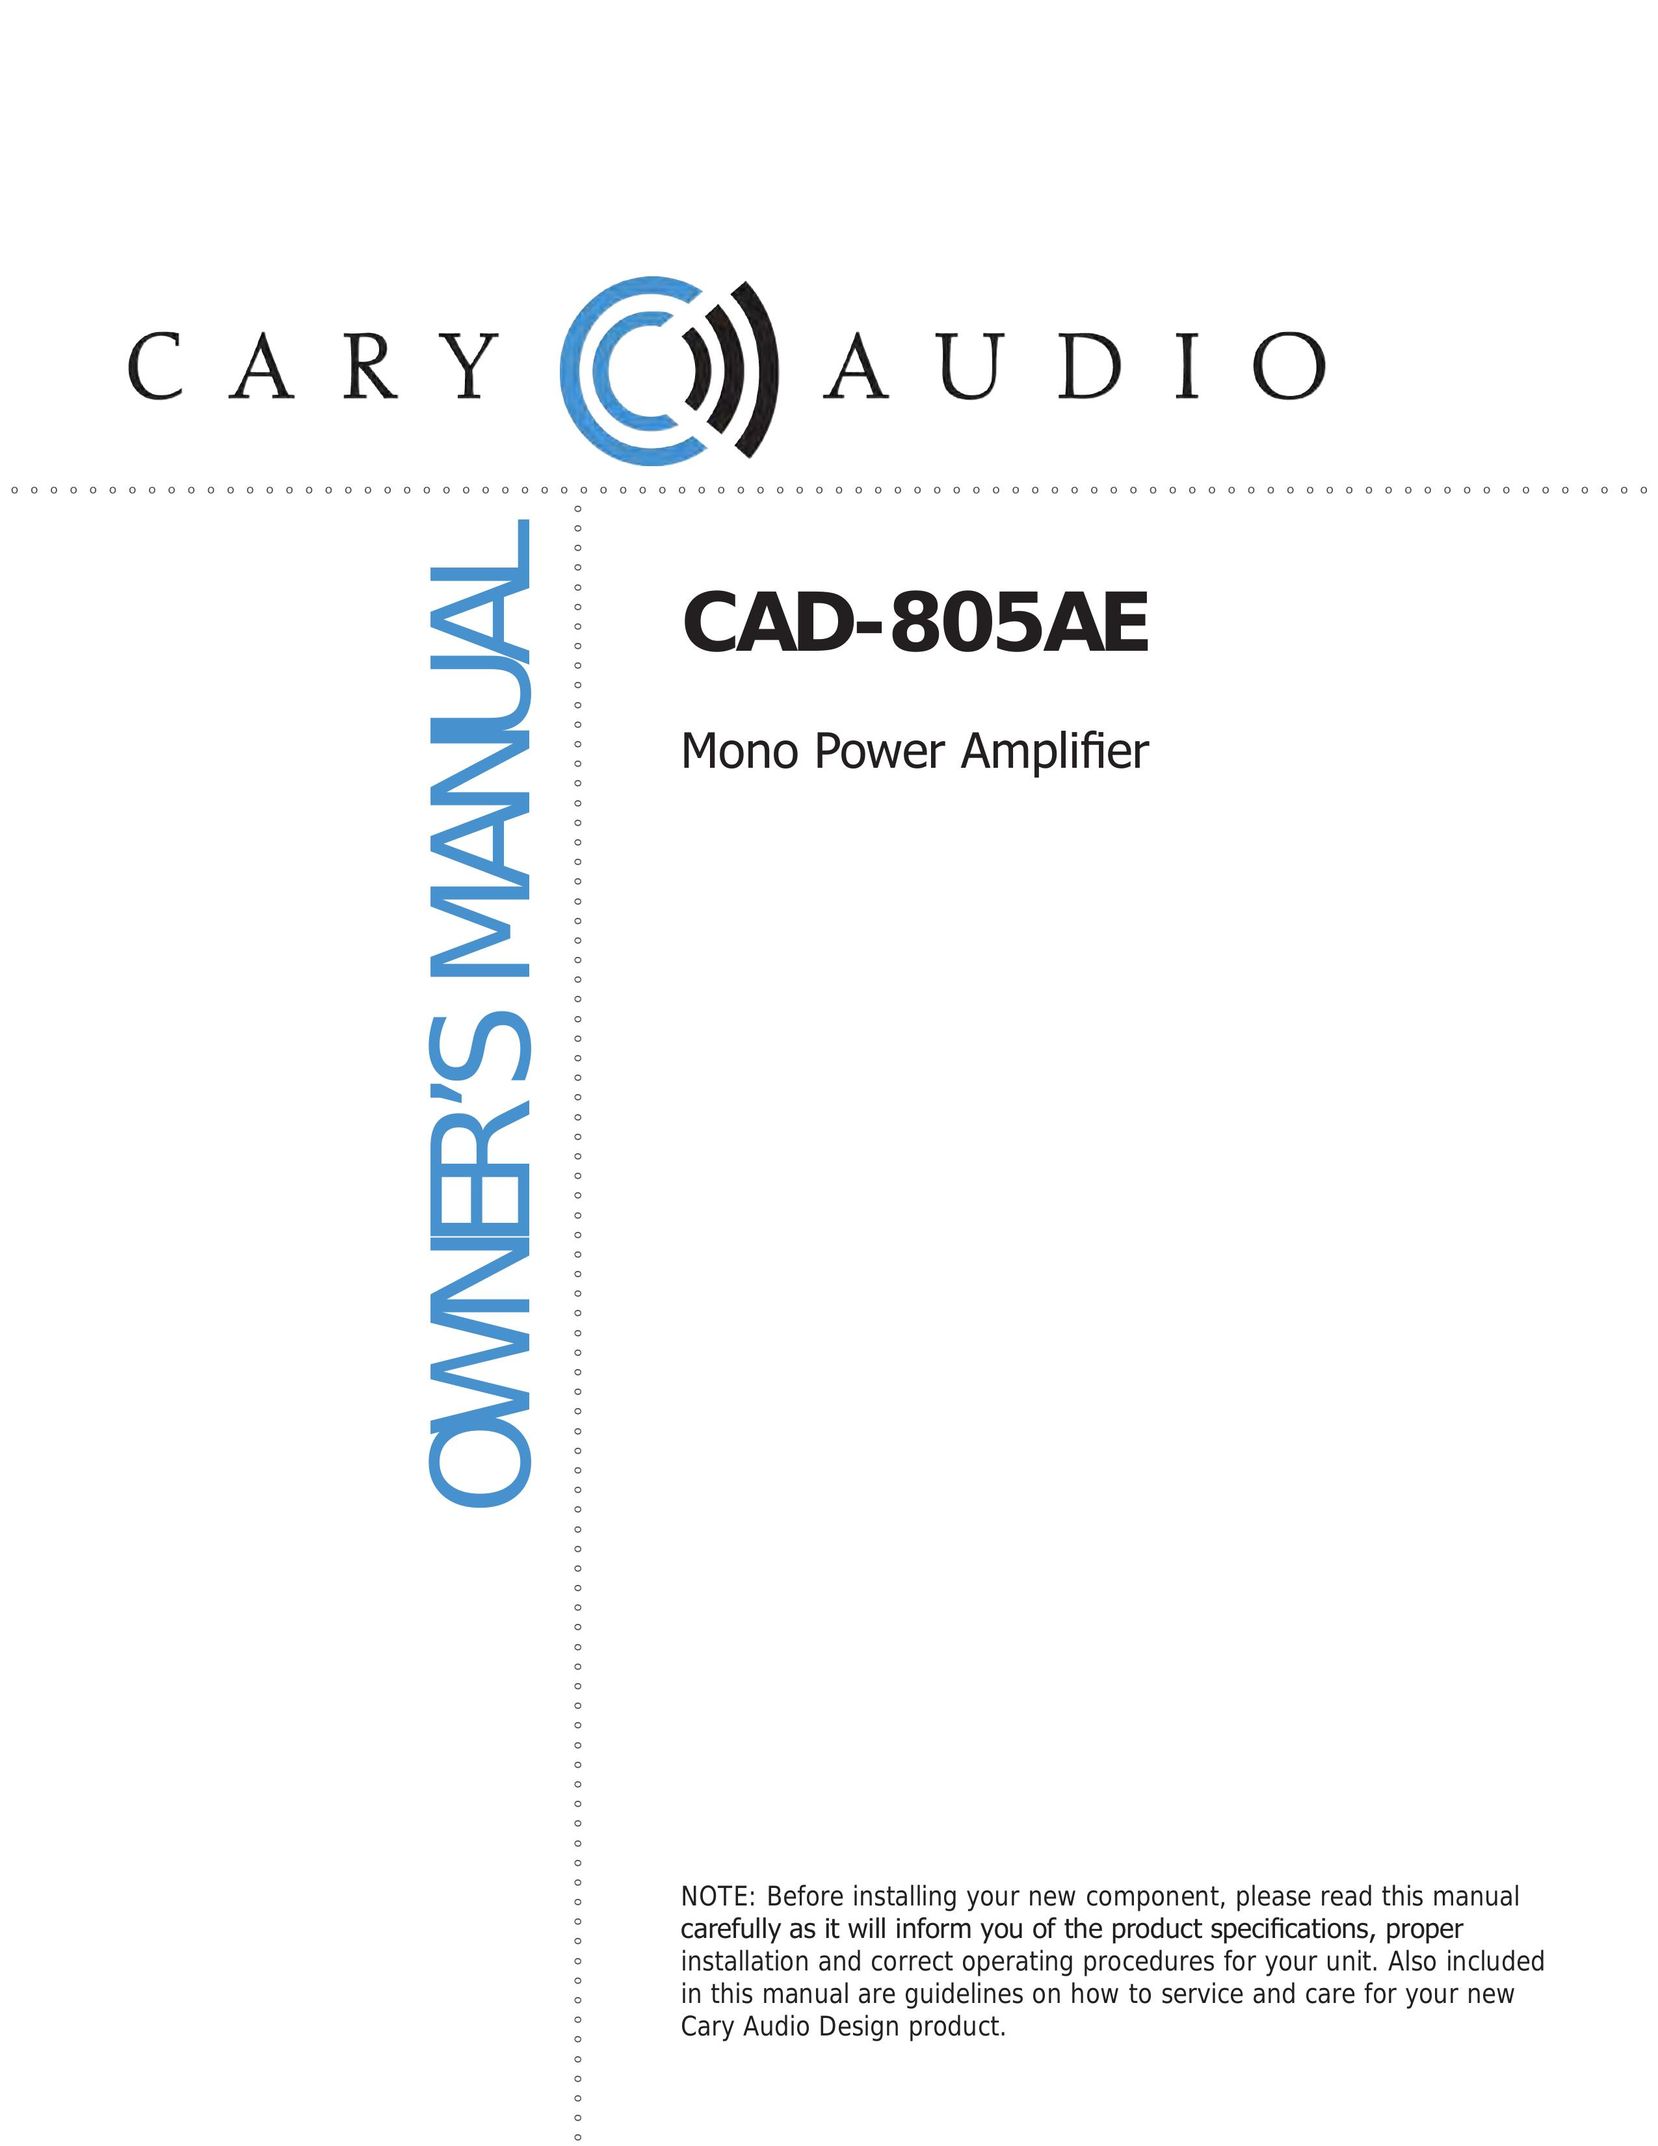 Cary Audio Design CAD-805AE Stereo Amplifier User Manual